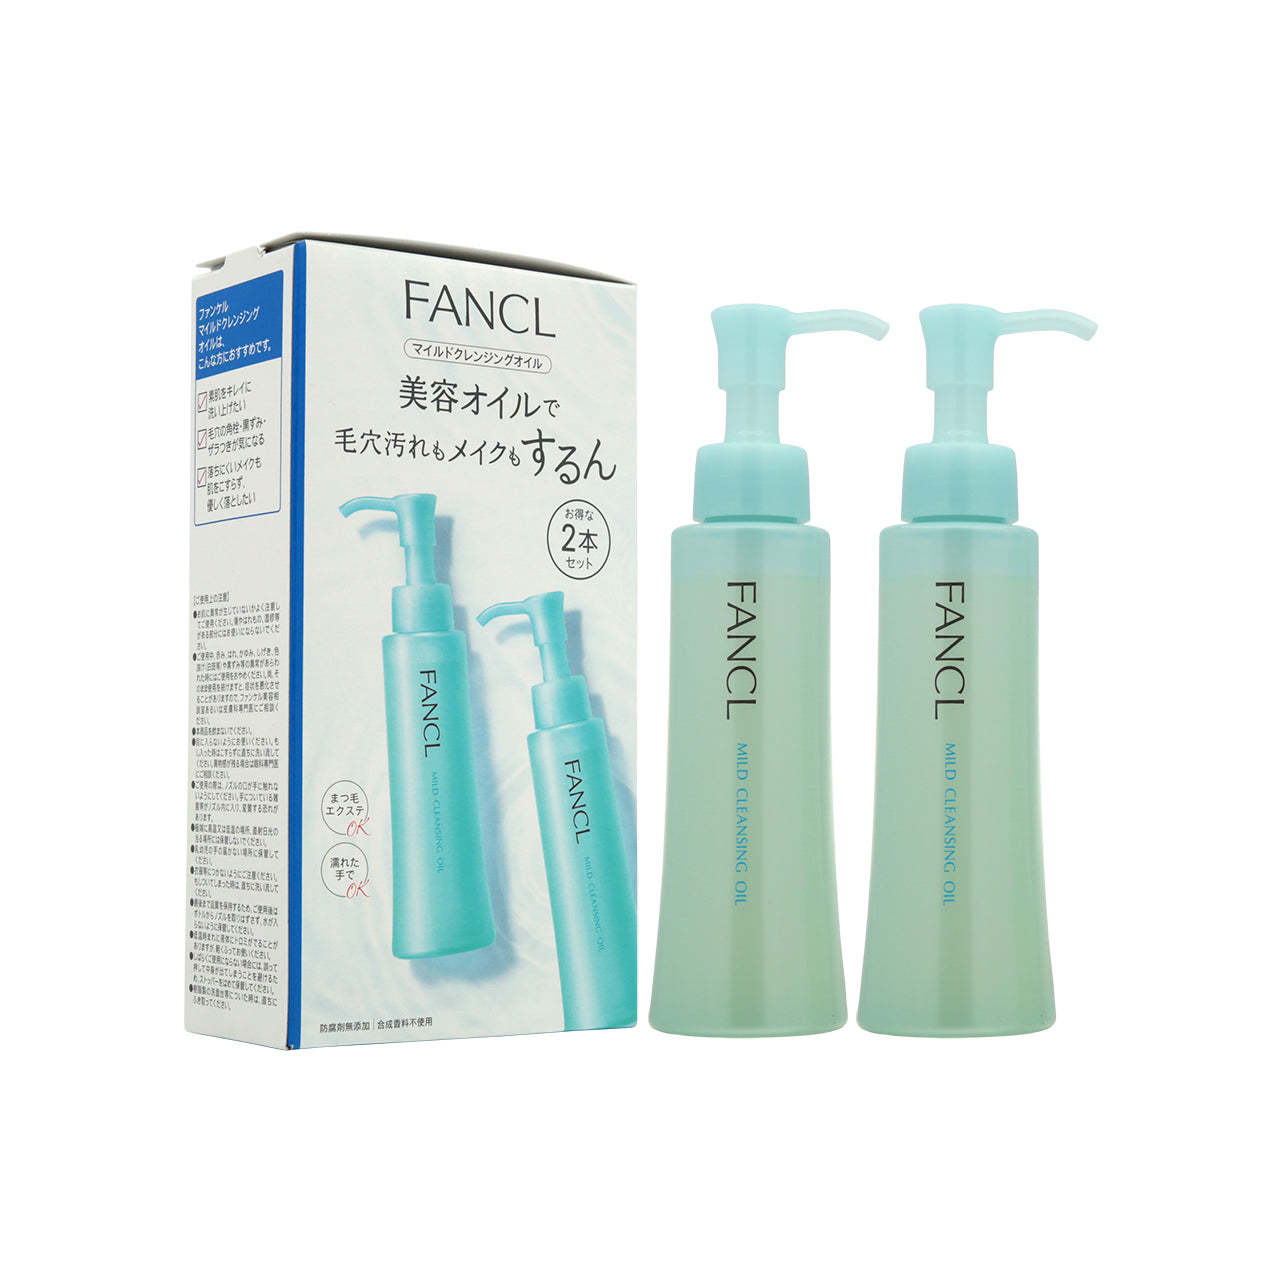 Fancl Mild Cleansing Oil DUO 120ml x 2